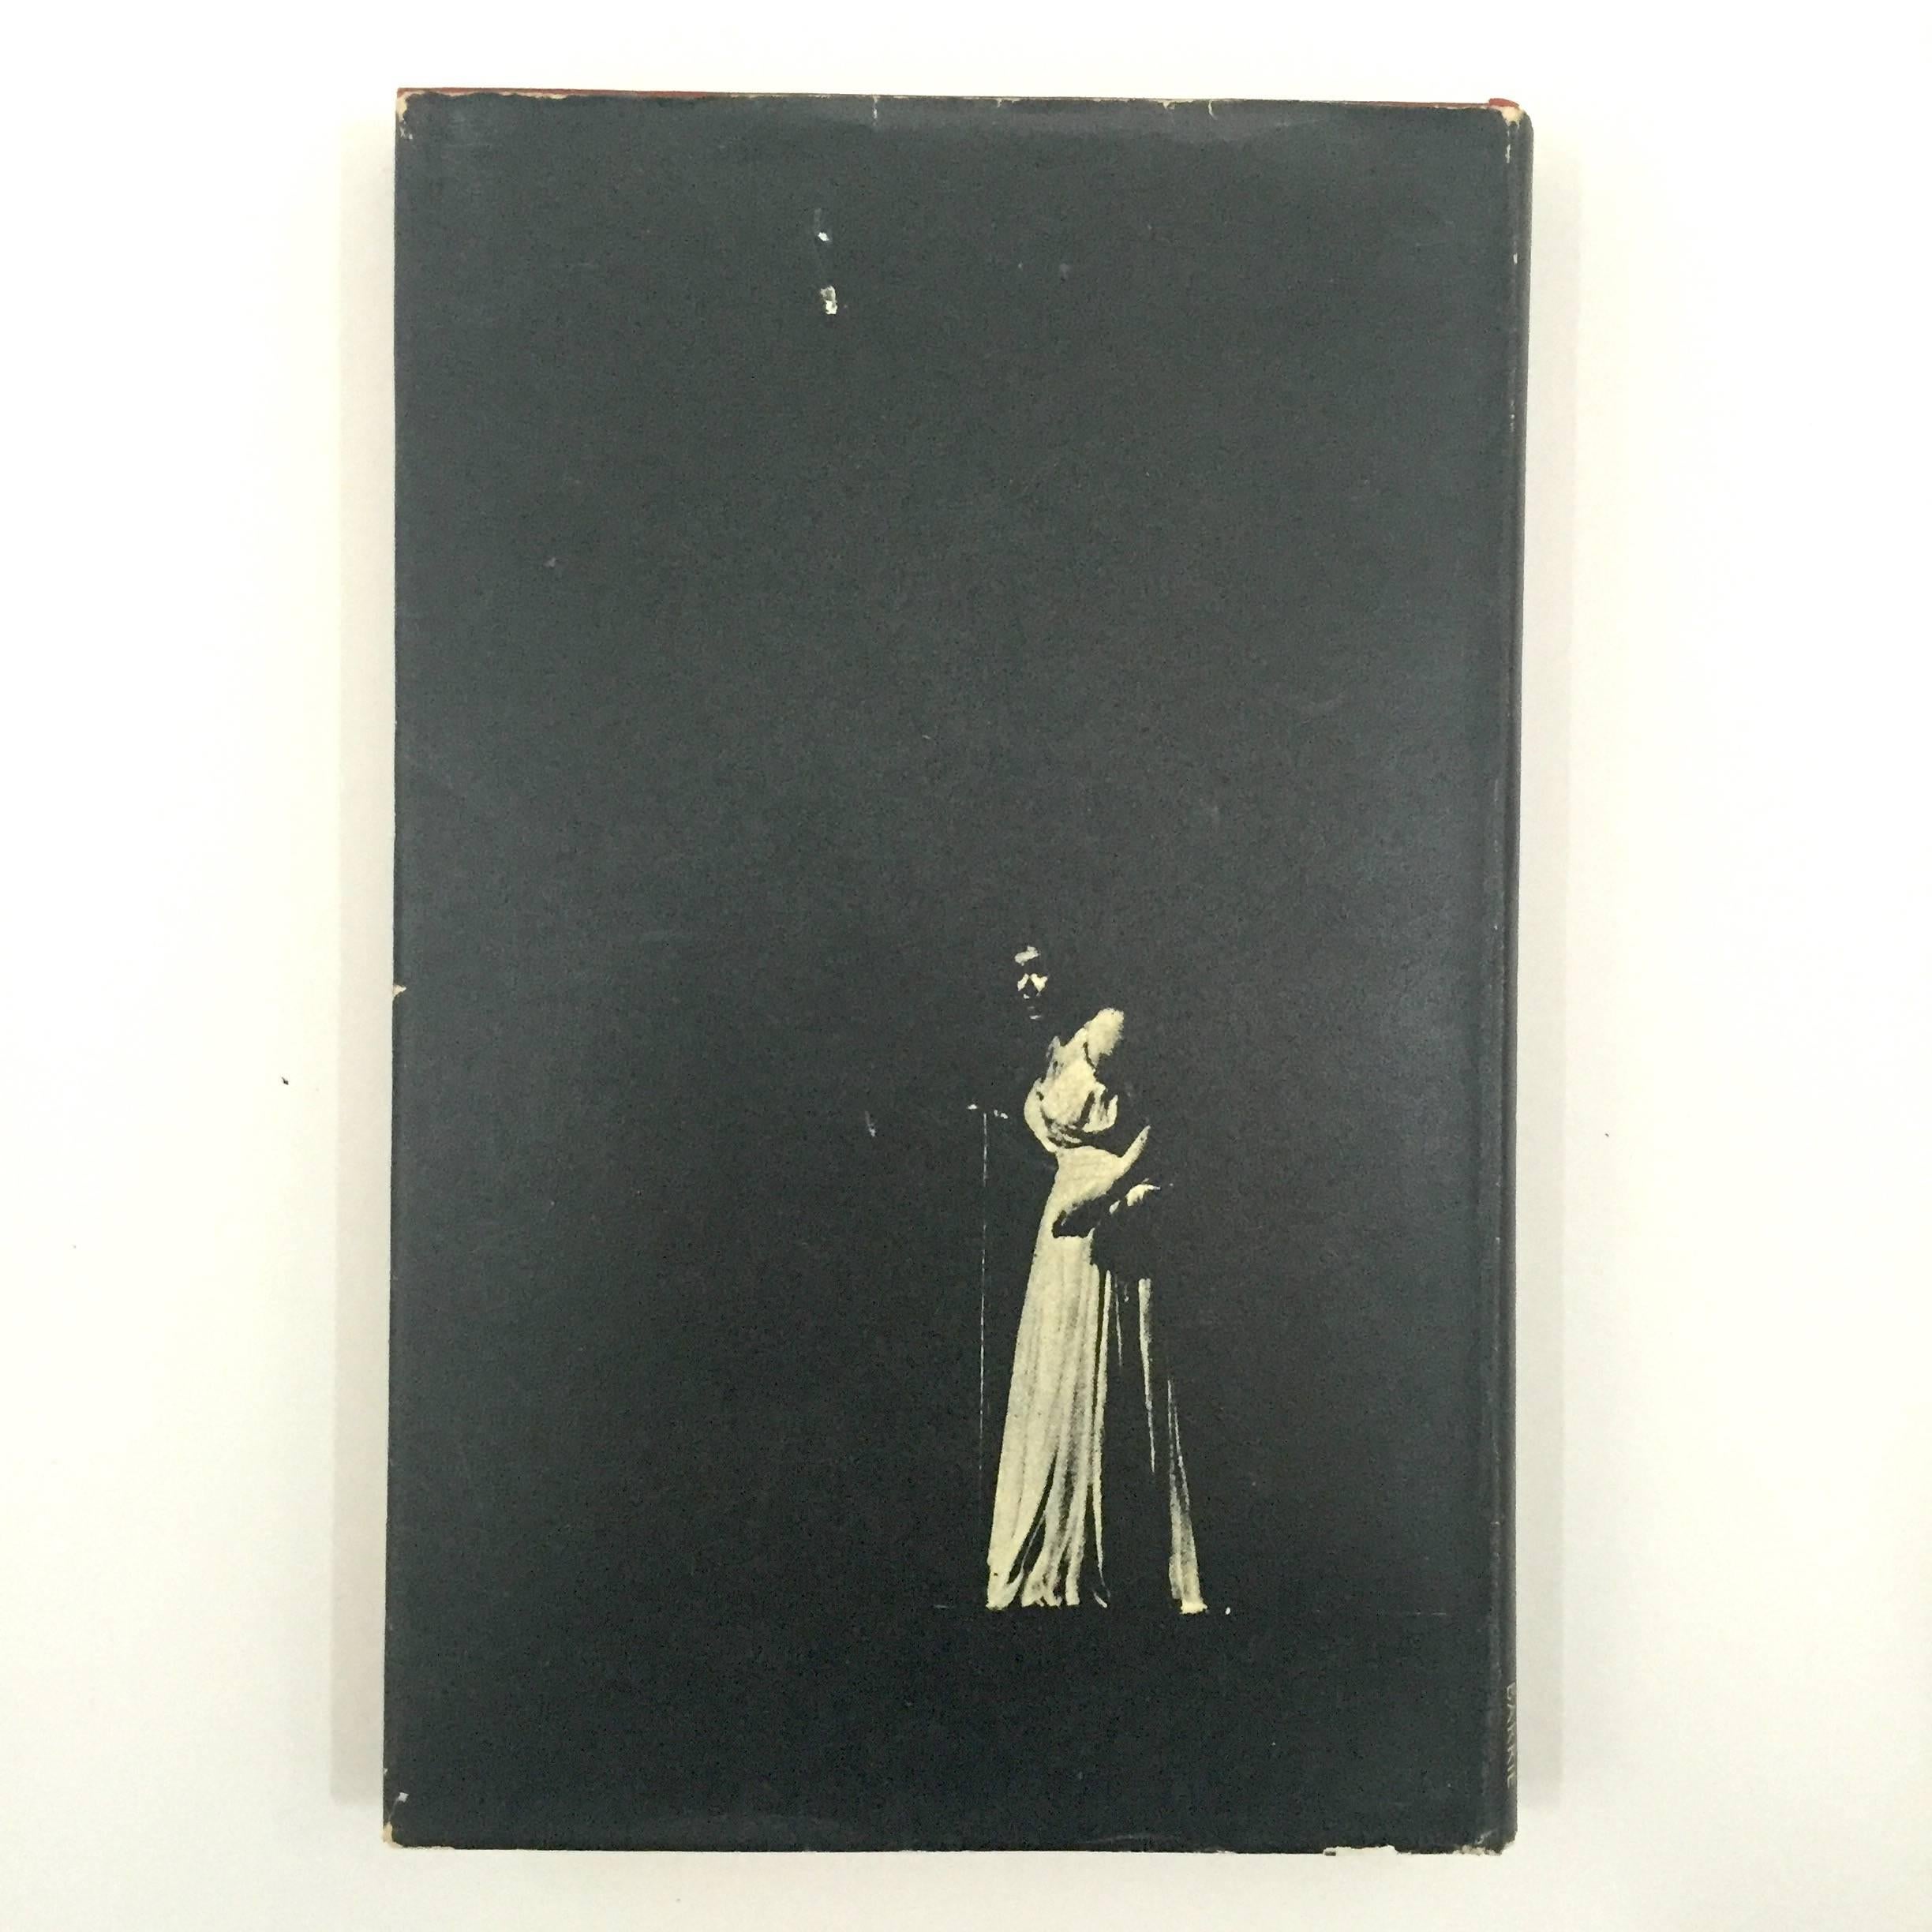 First UK edition, published by Barrie Books Ltd., London, 1958.

The autobiography (ghost-written by William Dufty) of the iconic jazz singer's compelling life and career as a musician. She writes of the hardships of growing up in a poverty